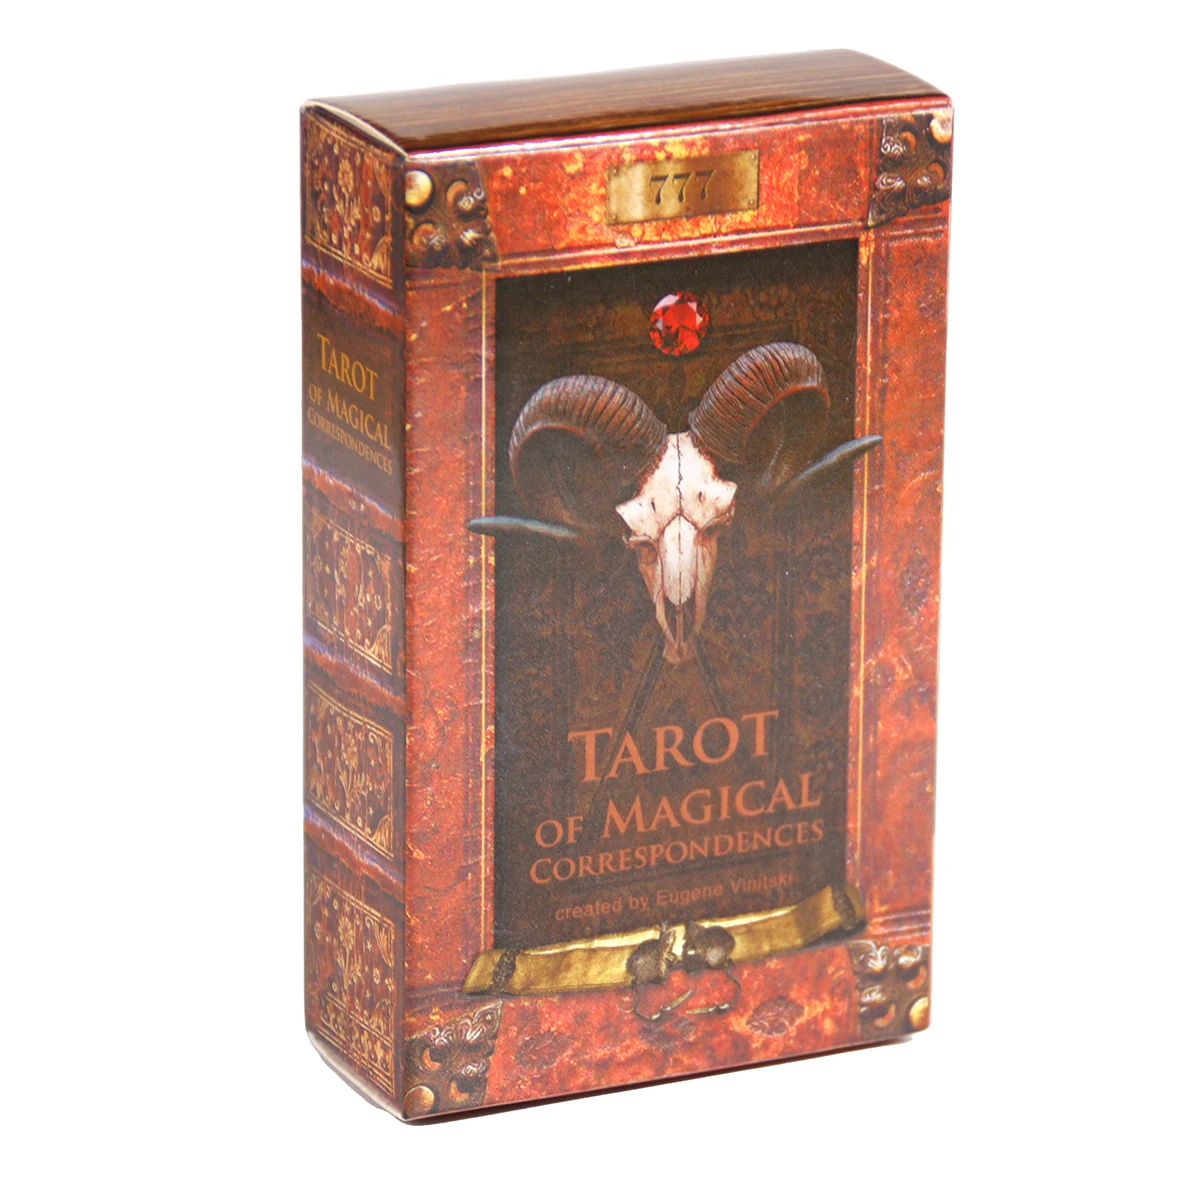 Tarot of Magical Correspondences Kabbalistic Cards Unique Occult Cards Deck for Tarot Reading Magic Cards for Prediction and Meditation 